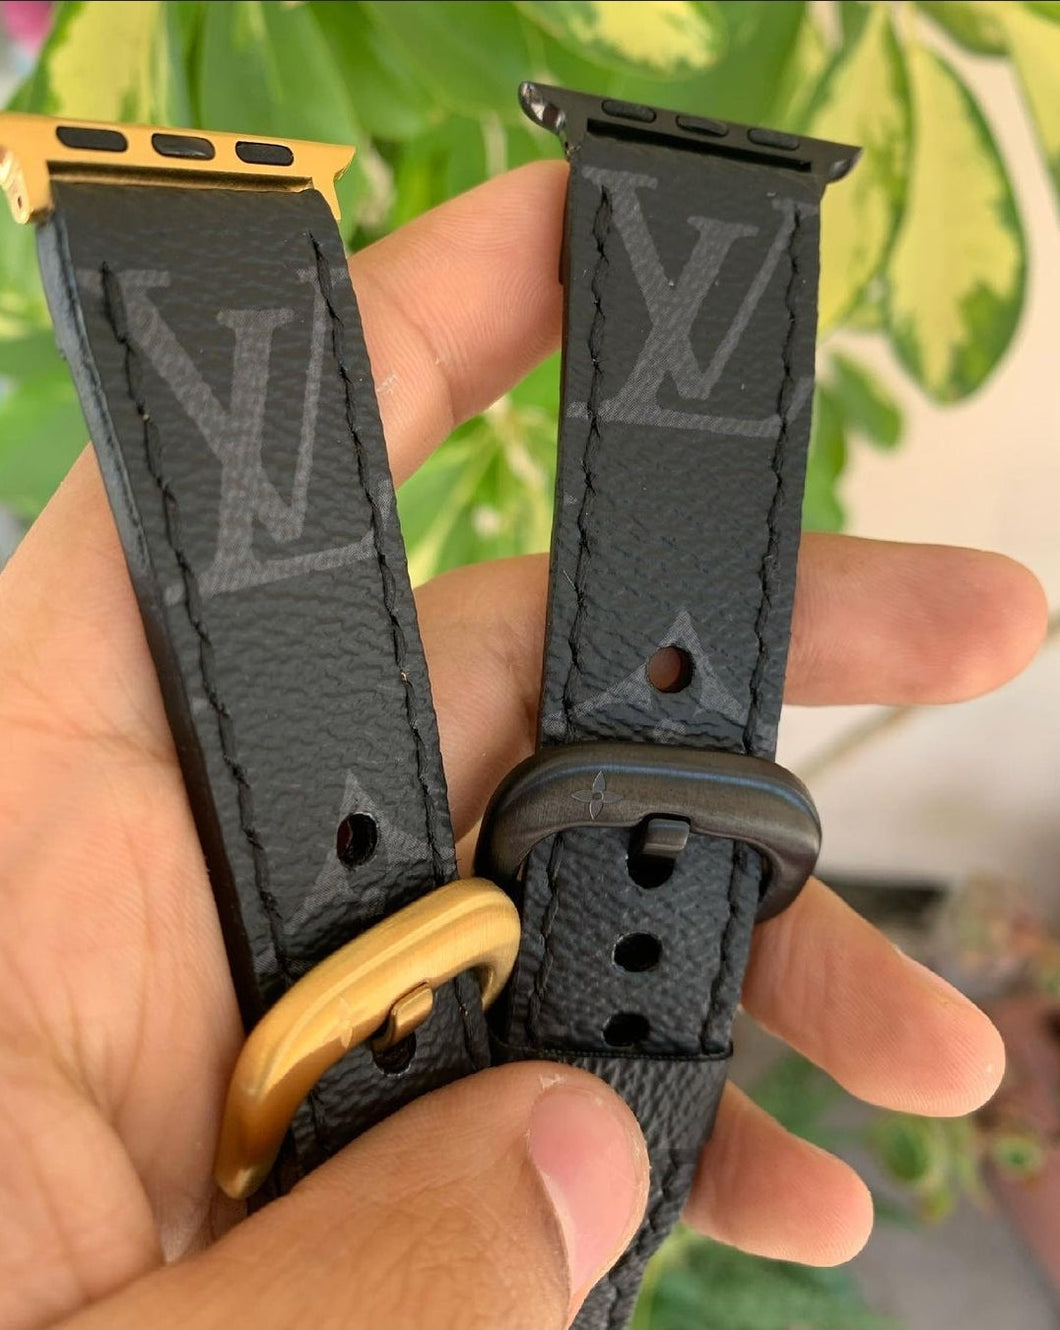 44mm apple watch band for women lv